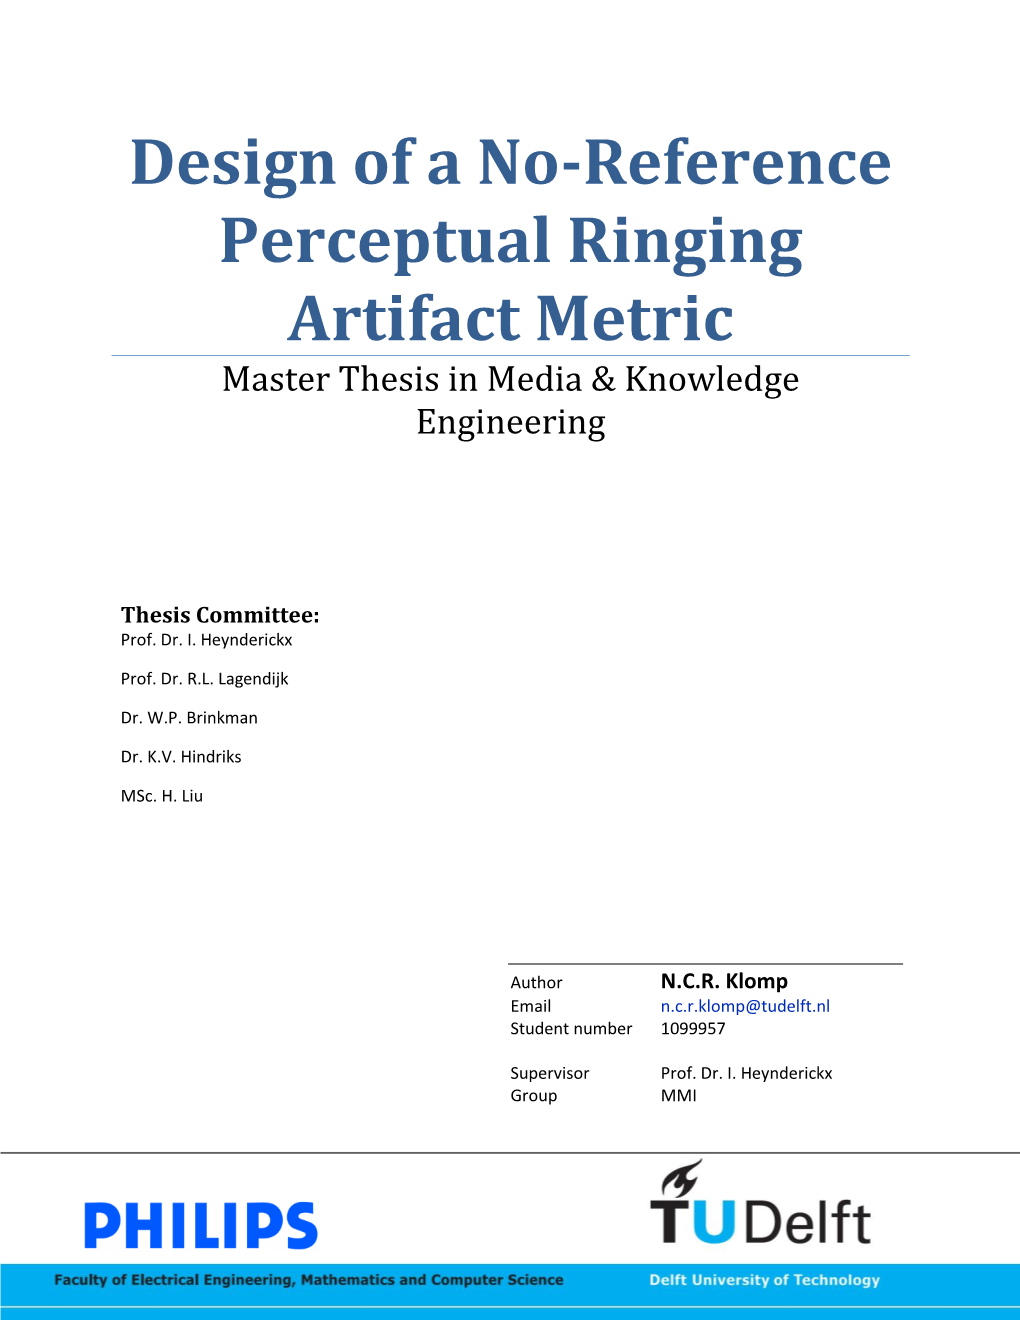 Design of a No-Reference Perceptual Ringing Artifact Metric Master Thesis in Media & Knowledge Engineering